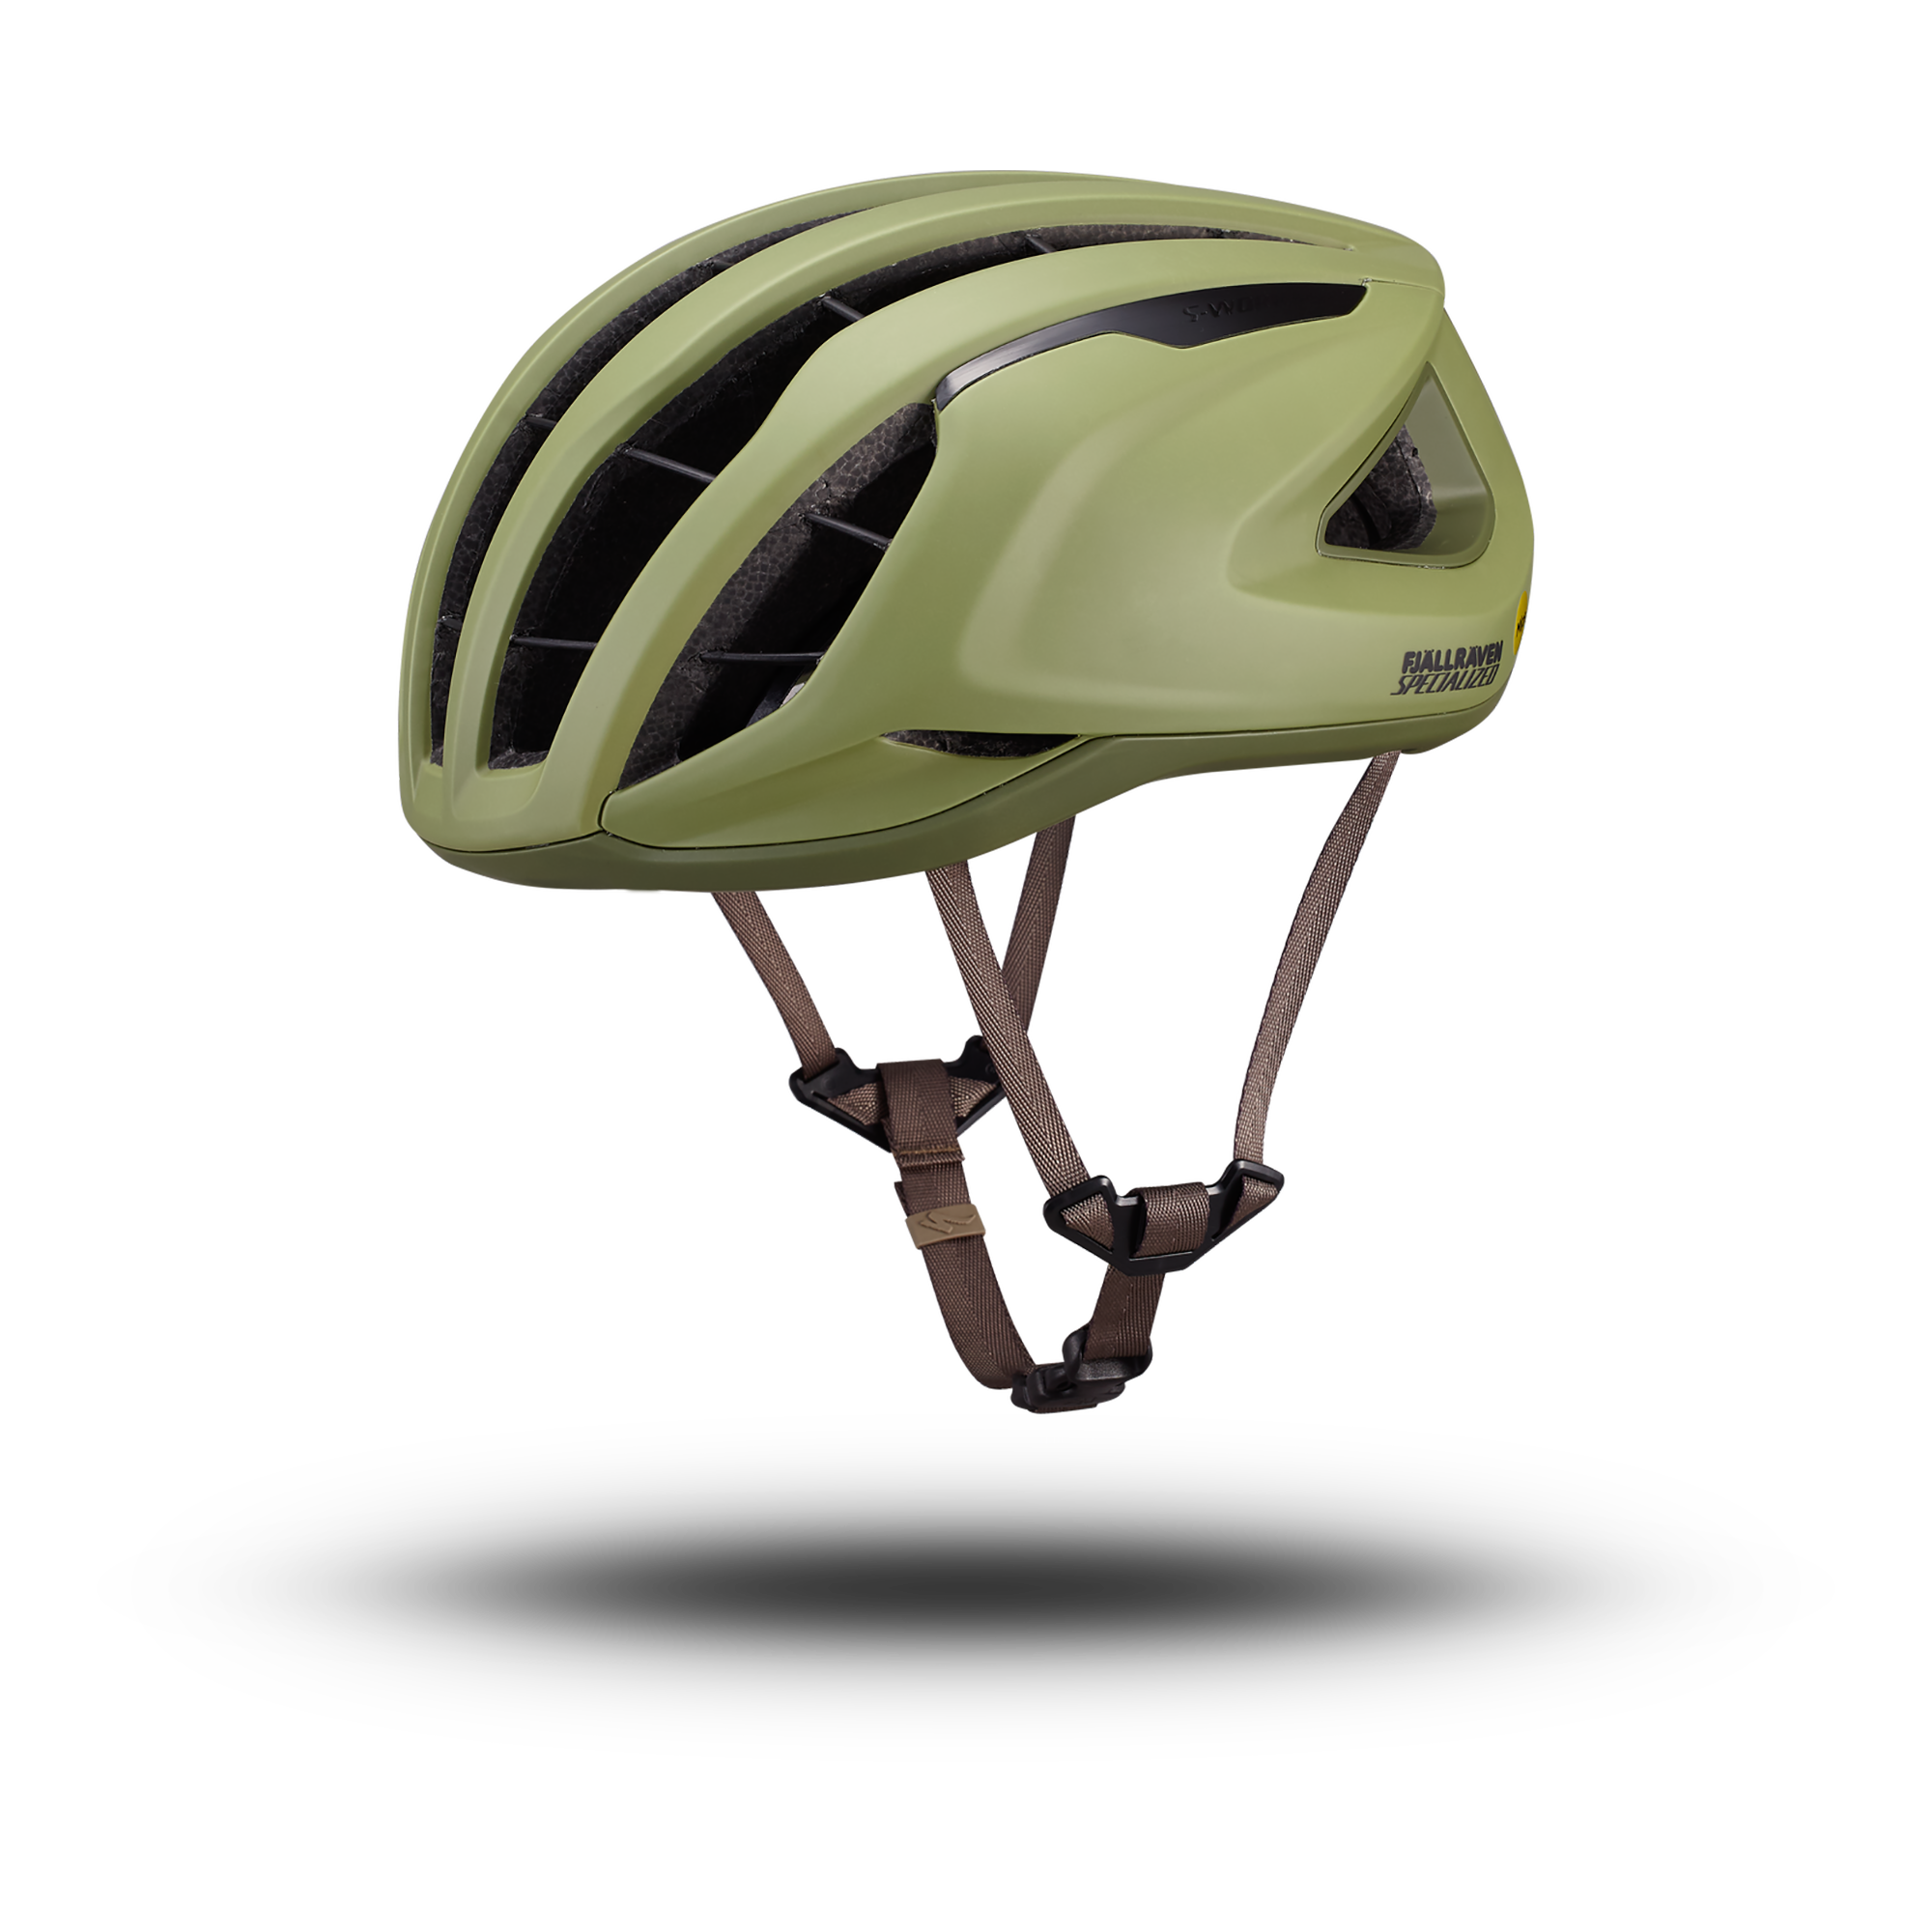 Casque S-Works Prevail 3